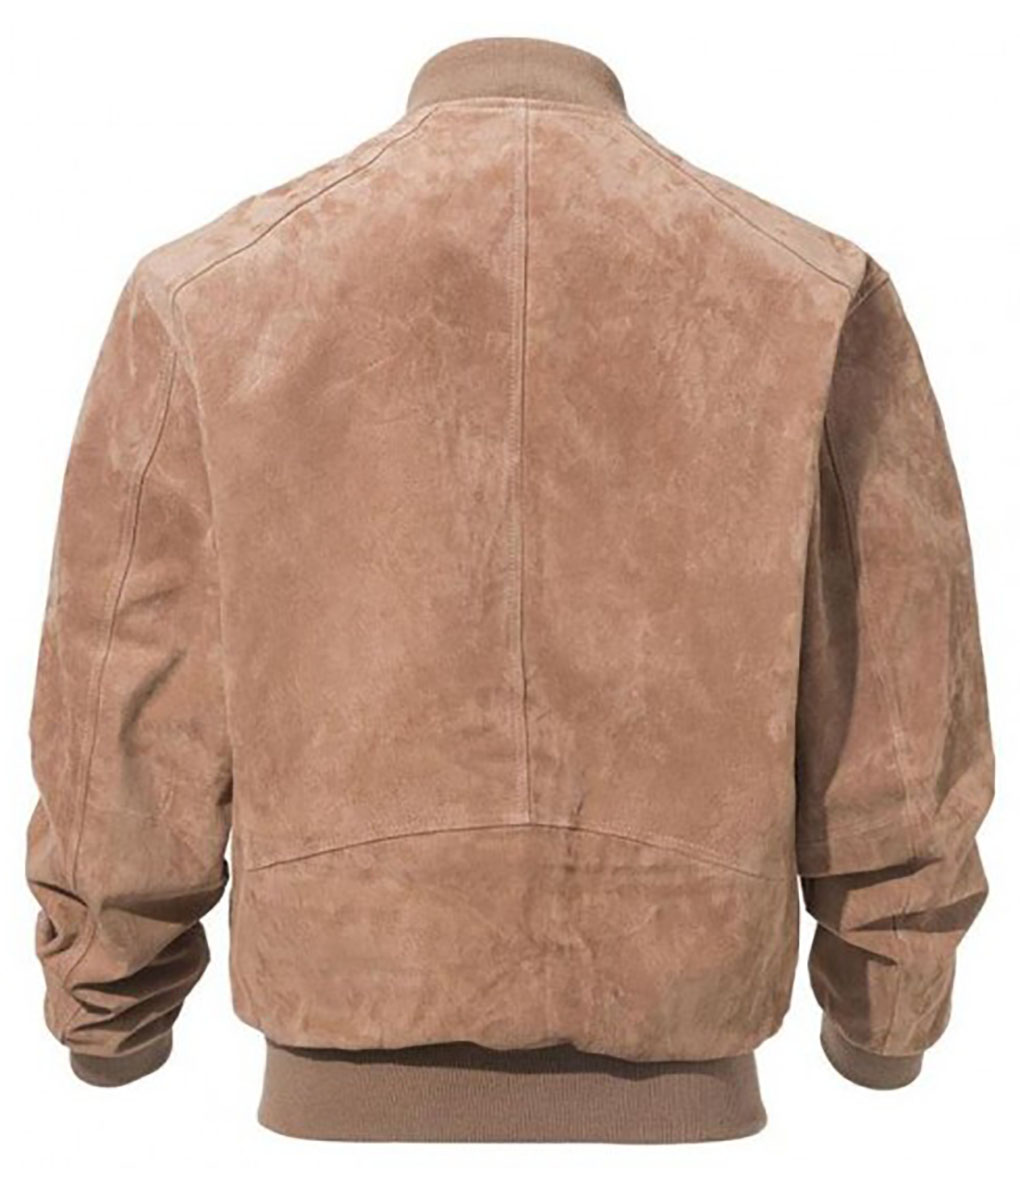 Donald Mens Suede Leather Bomber Jacket